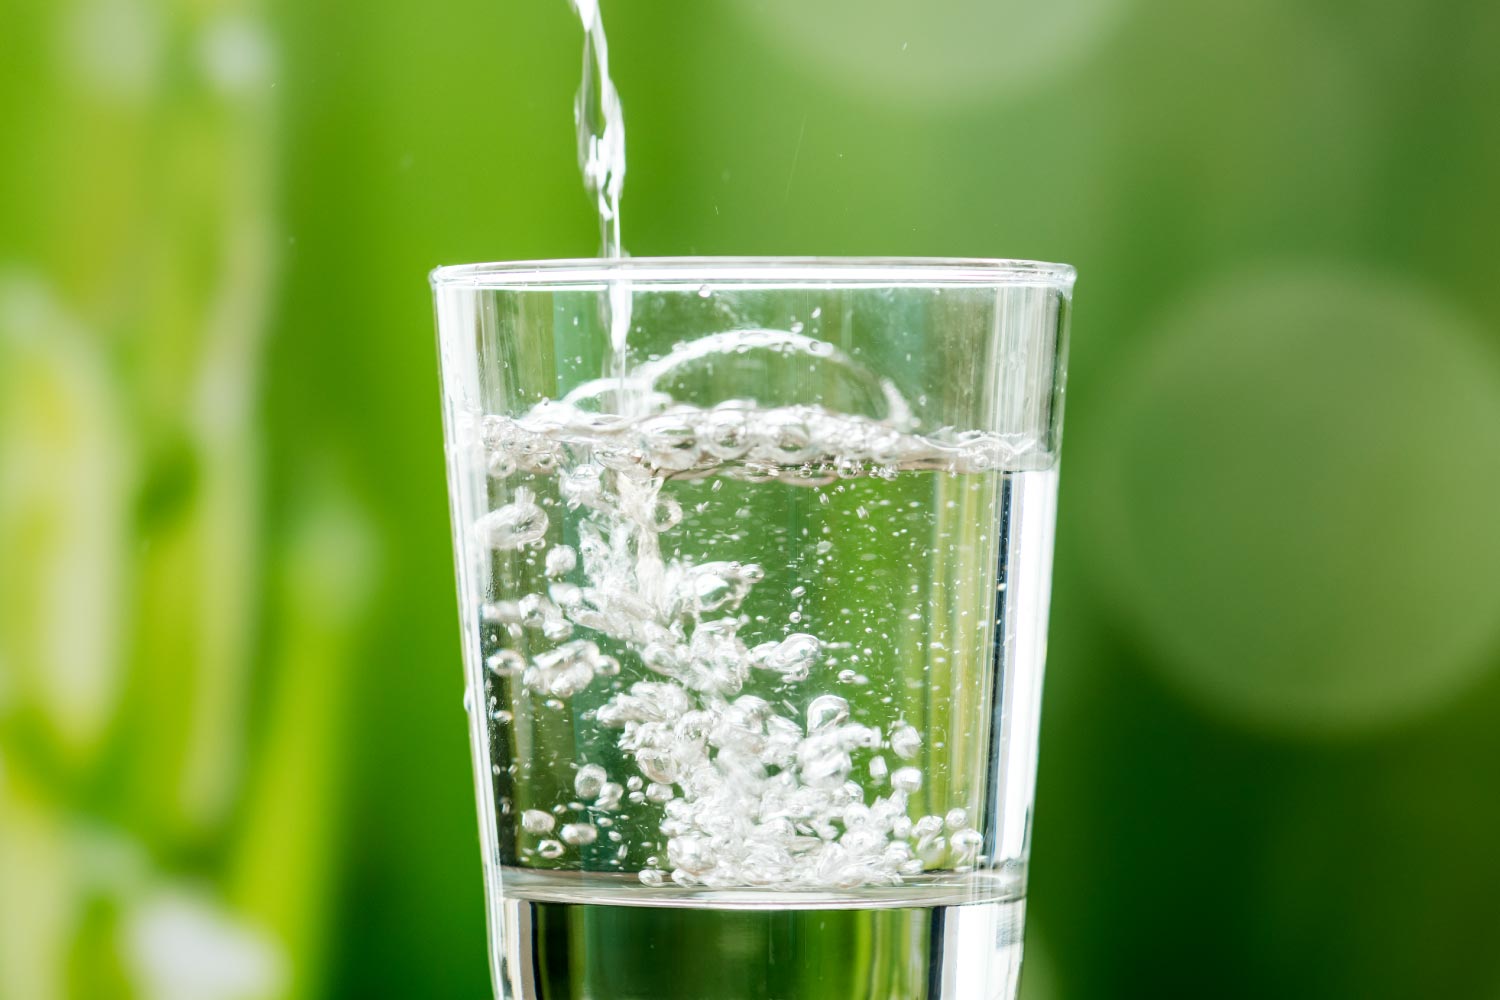 Side view of water being poured into a glass against a green background